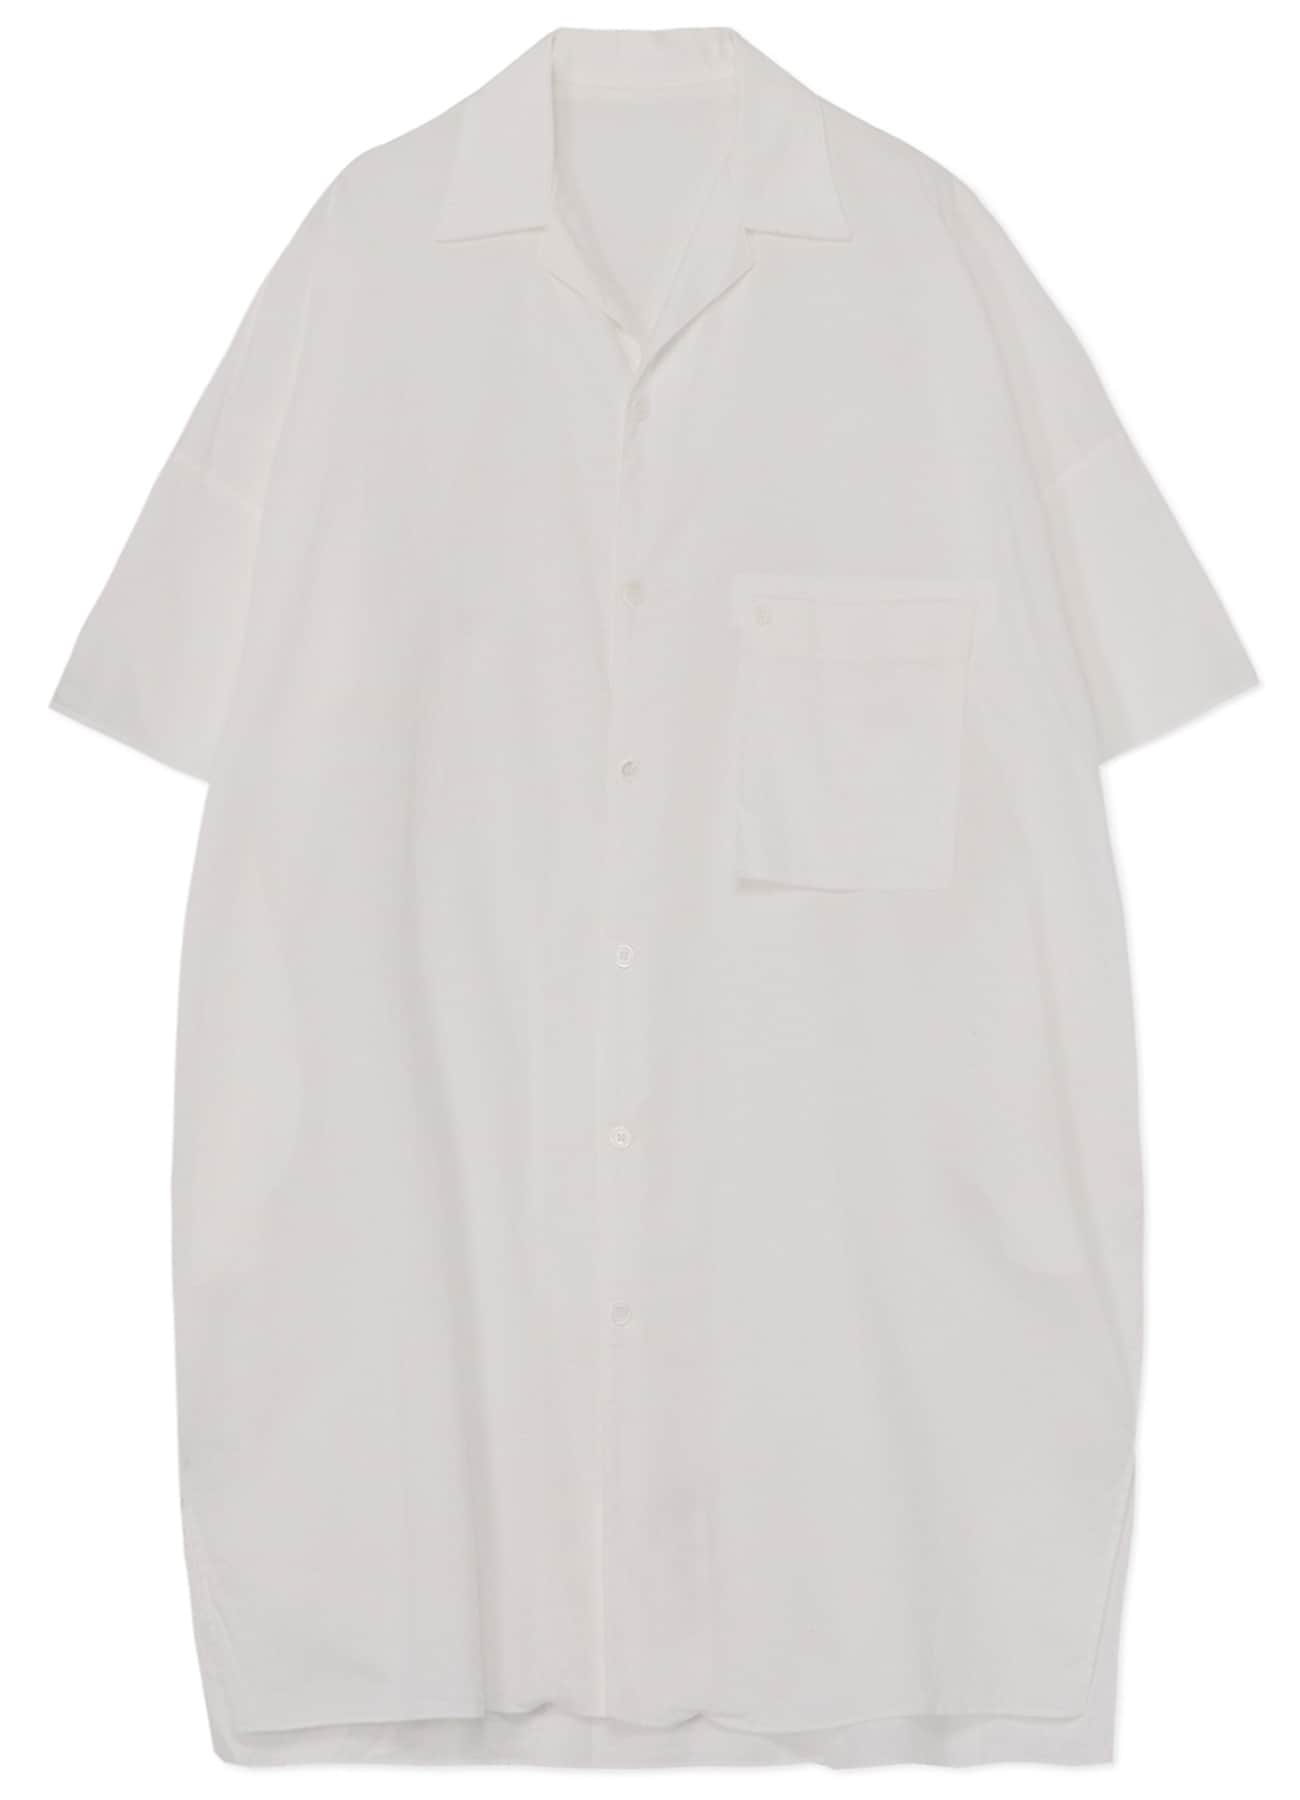 [Y's BORN PRODUCT]COTTON THIN TWILL FRONT POCKET SHIRT DRESS